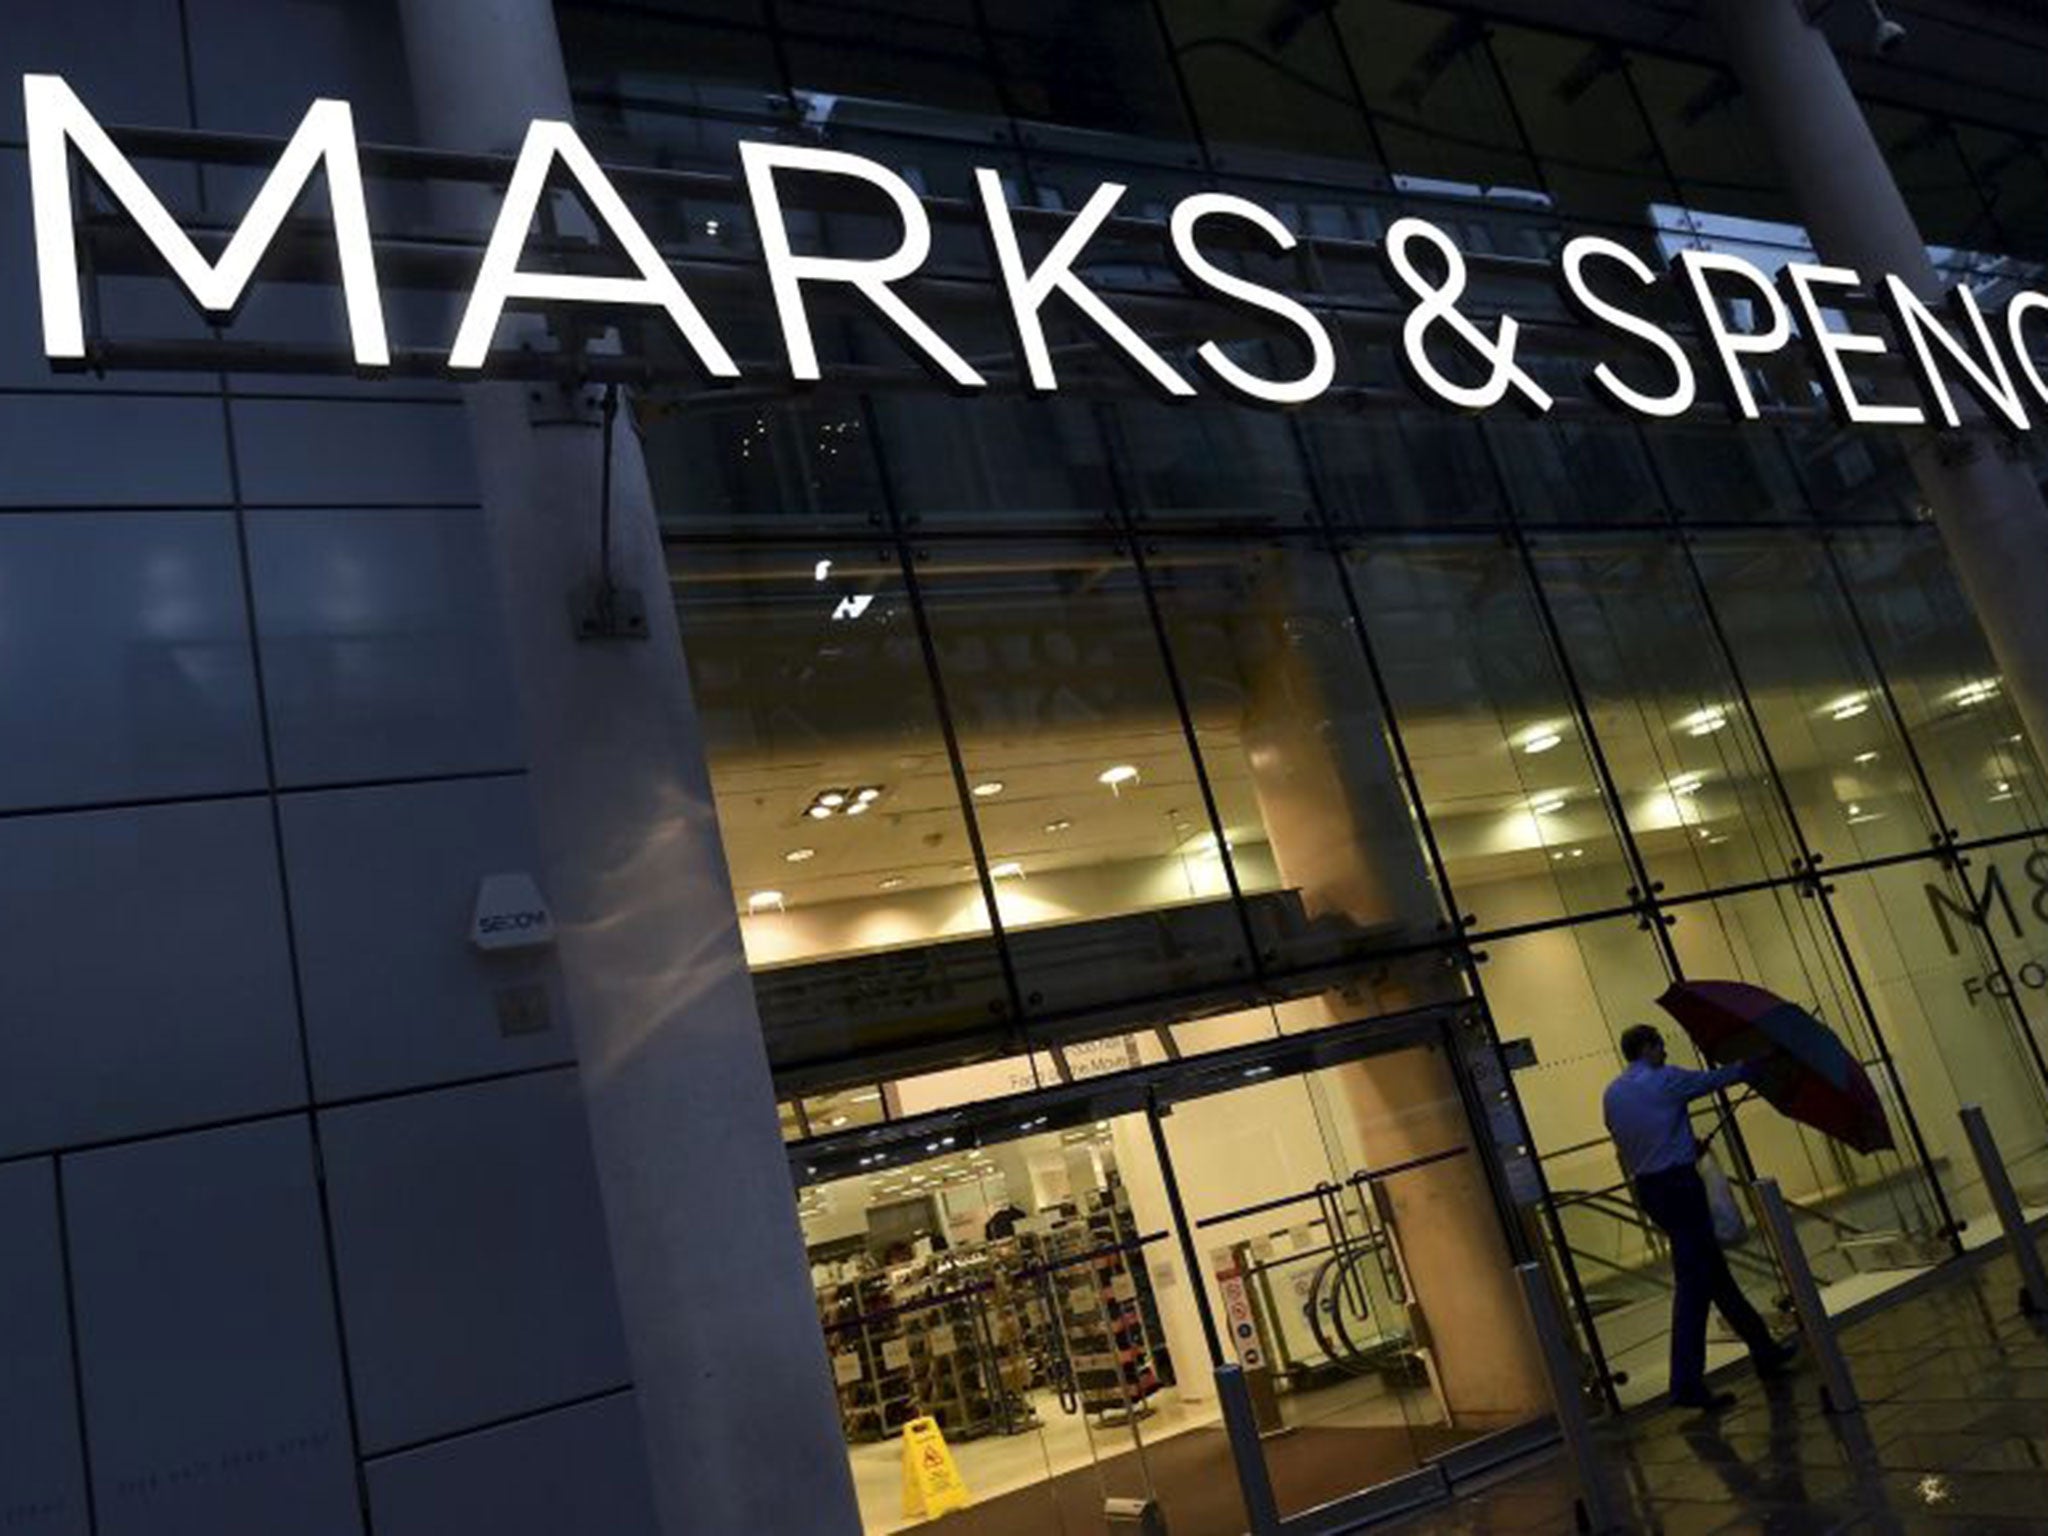 M&S was one of the losers on retail Super Thursday